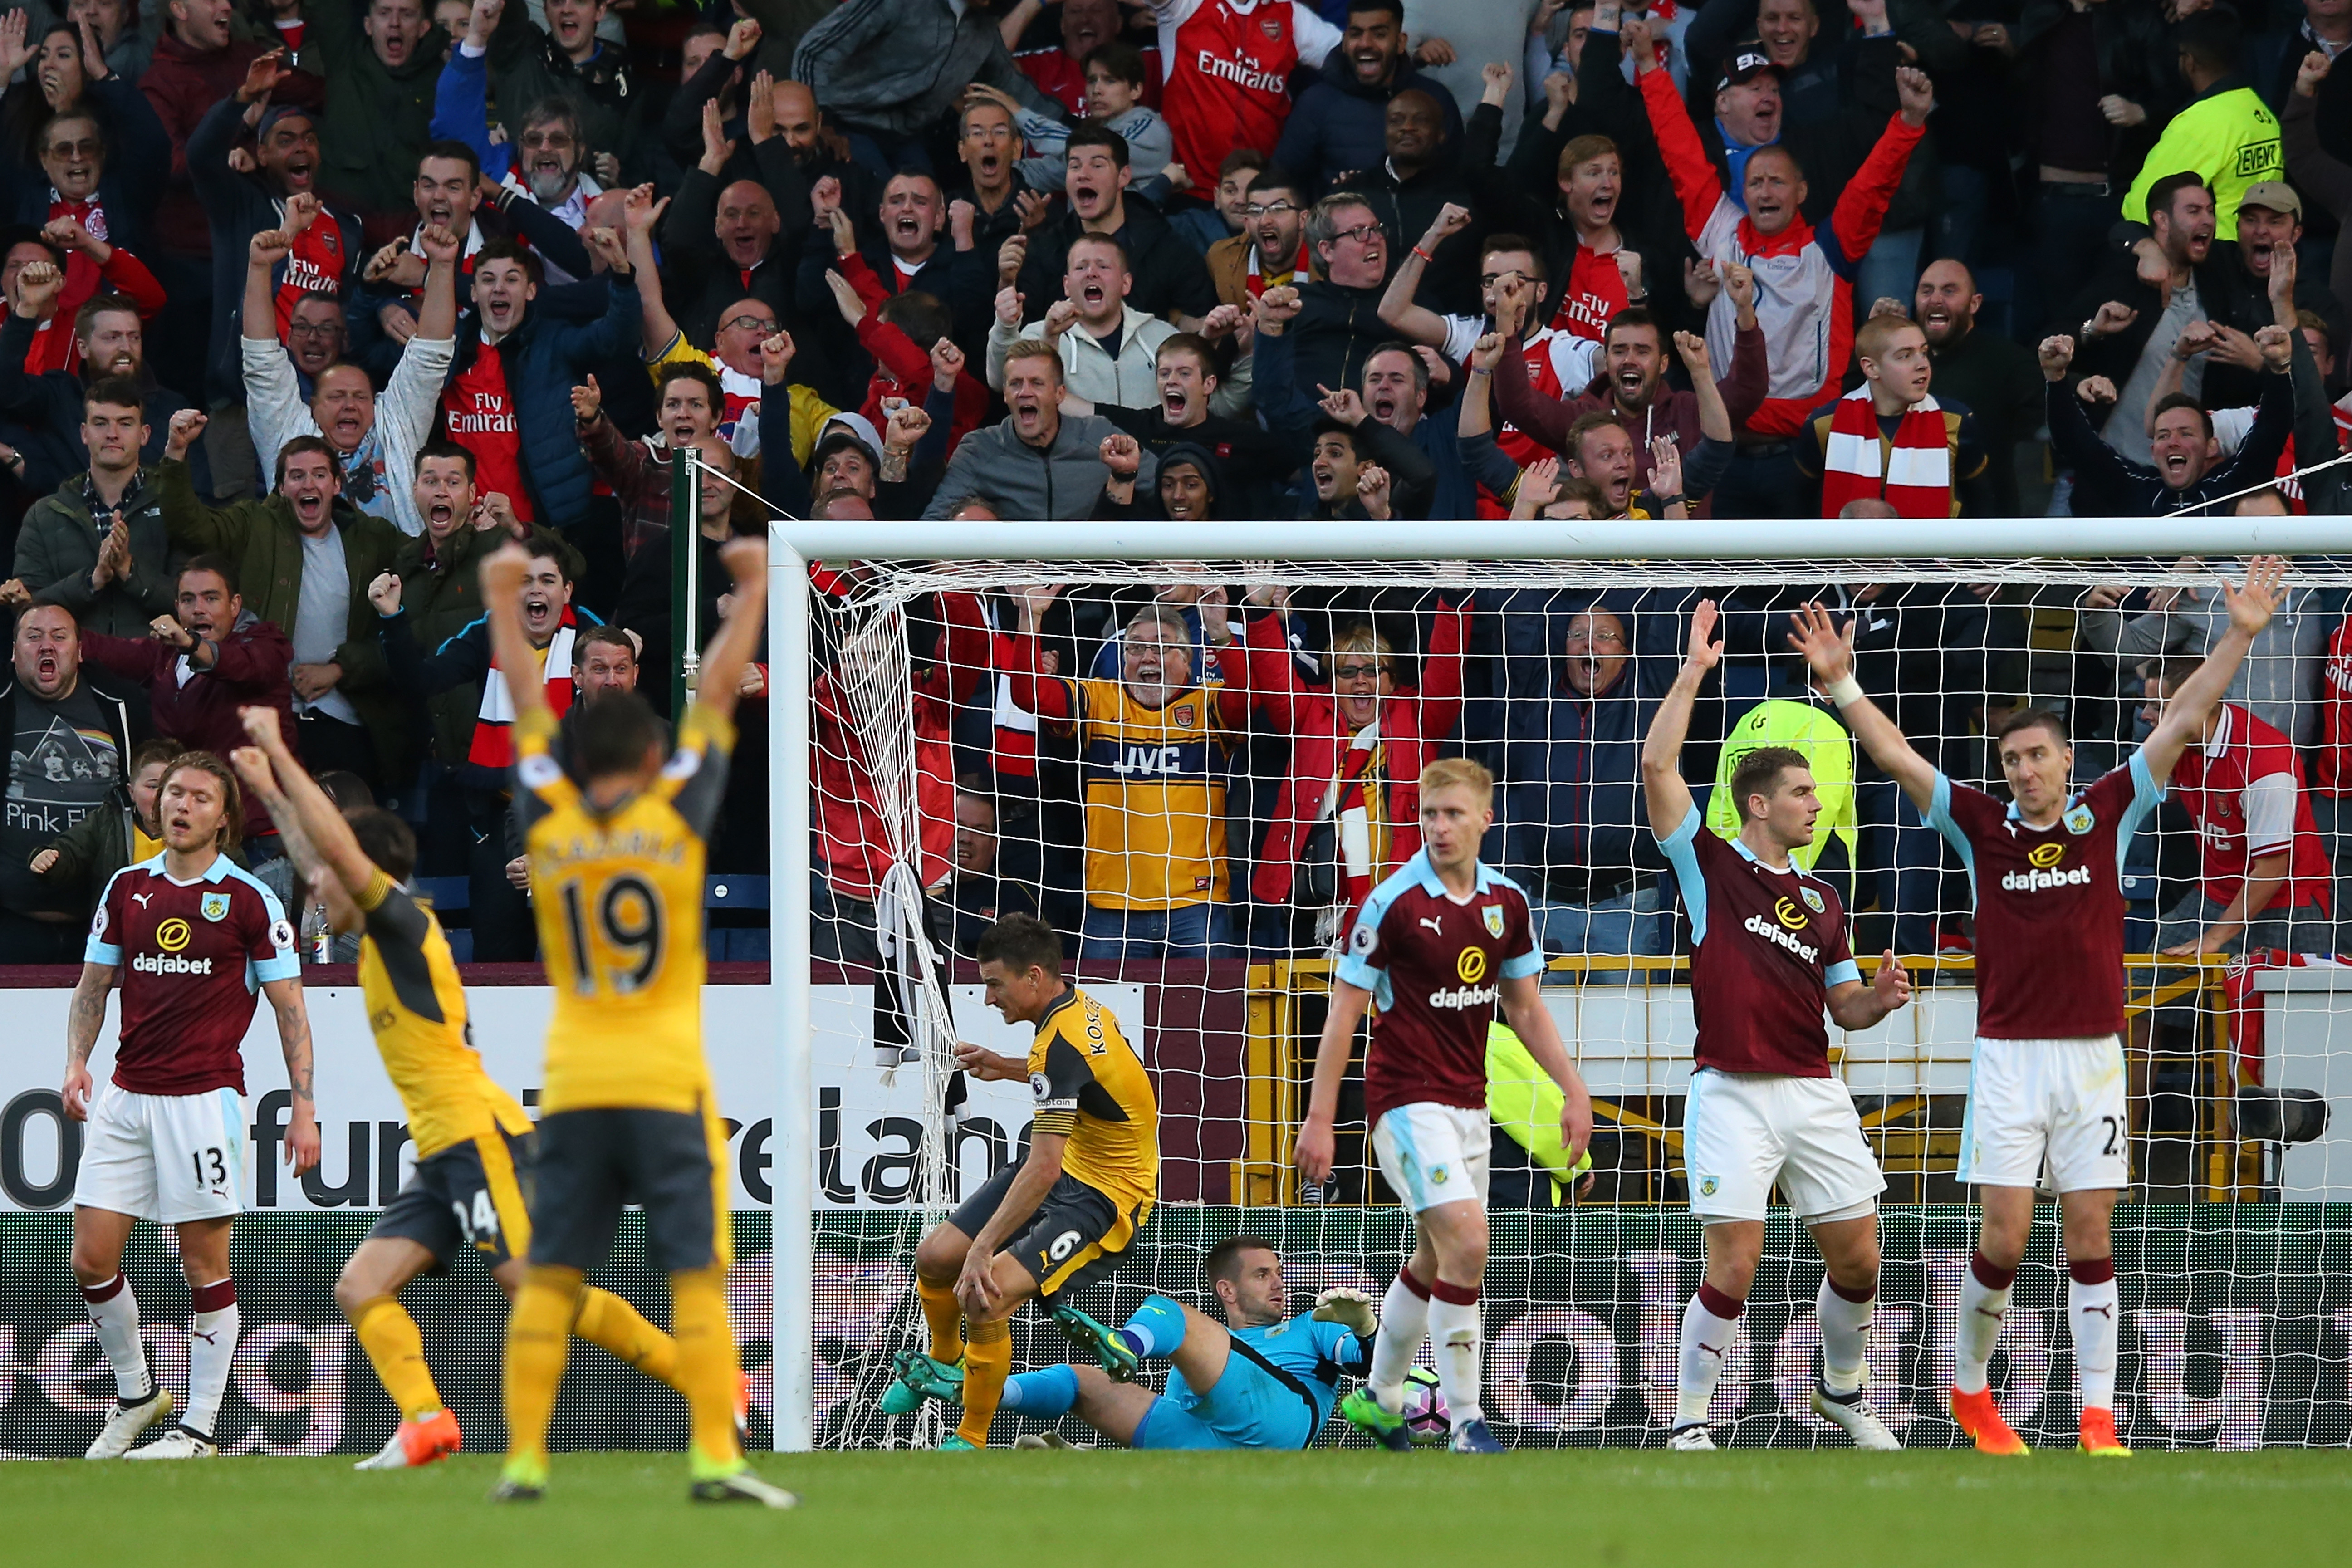 5 things that stood out in GW 7 : Arsenal's handball goal and United's ineffective show